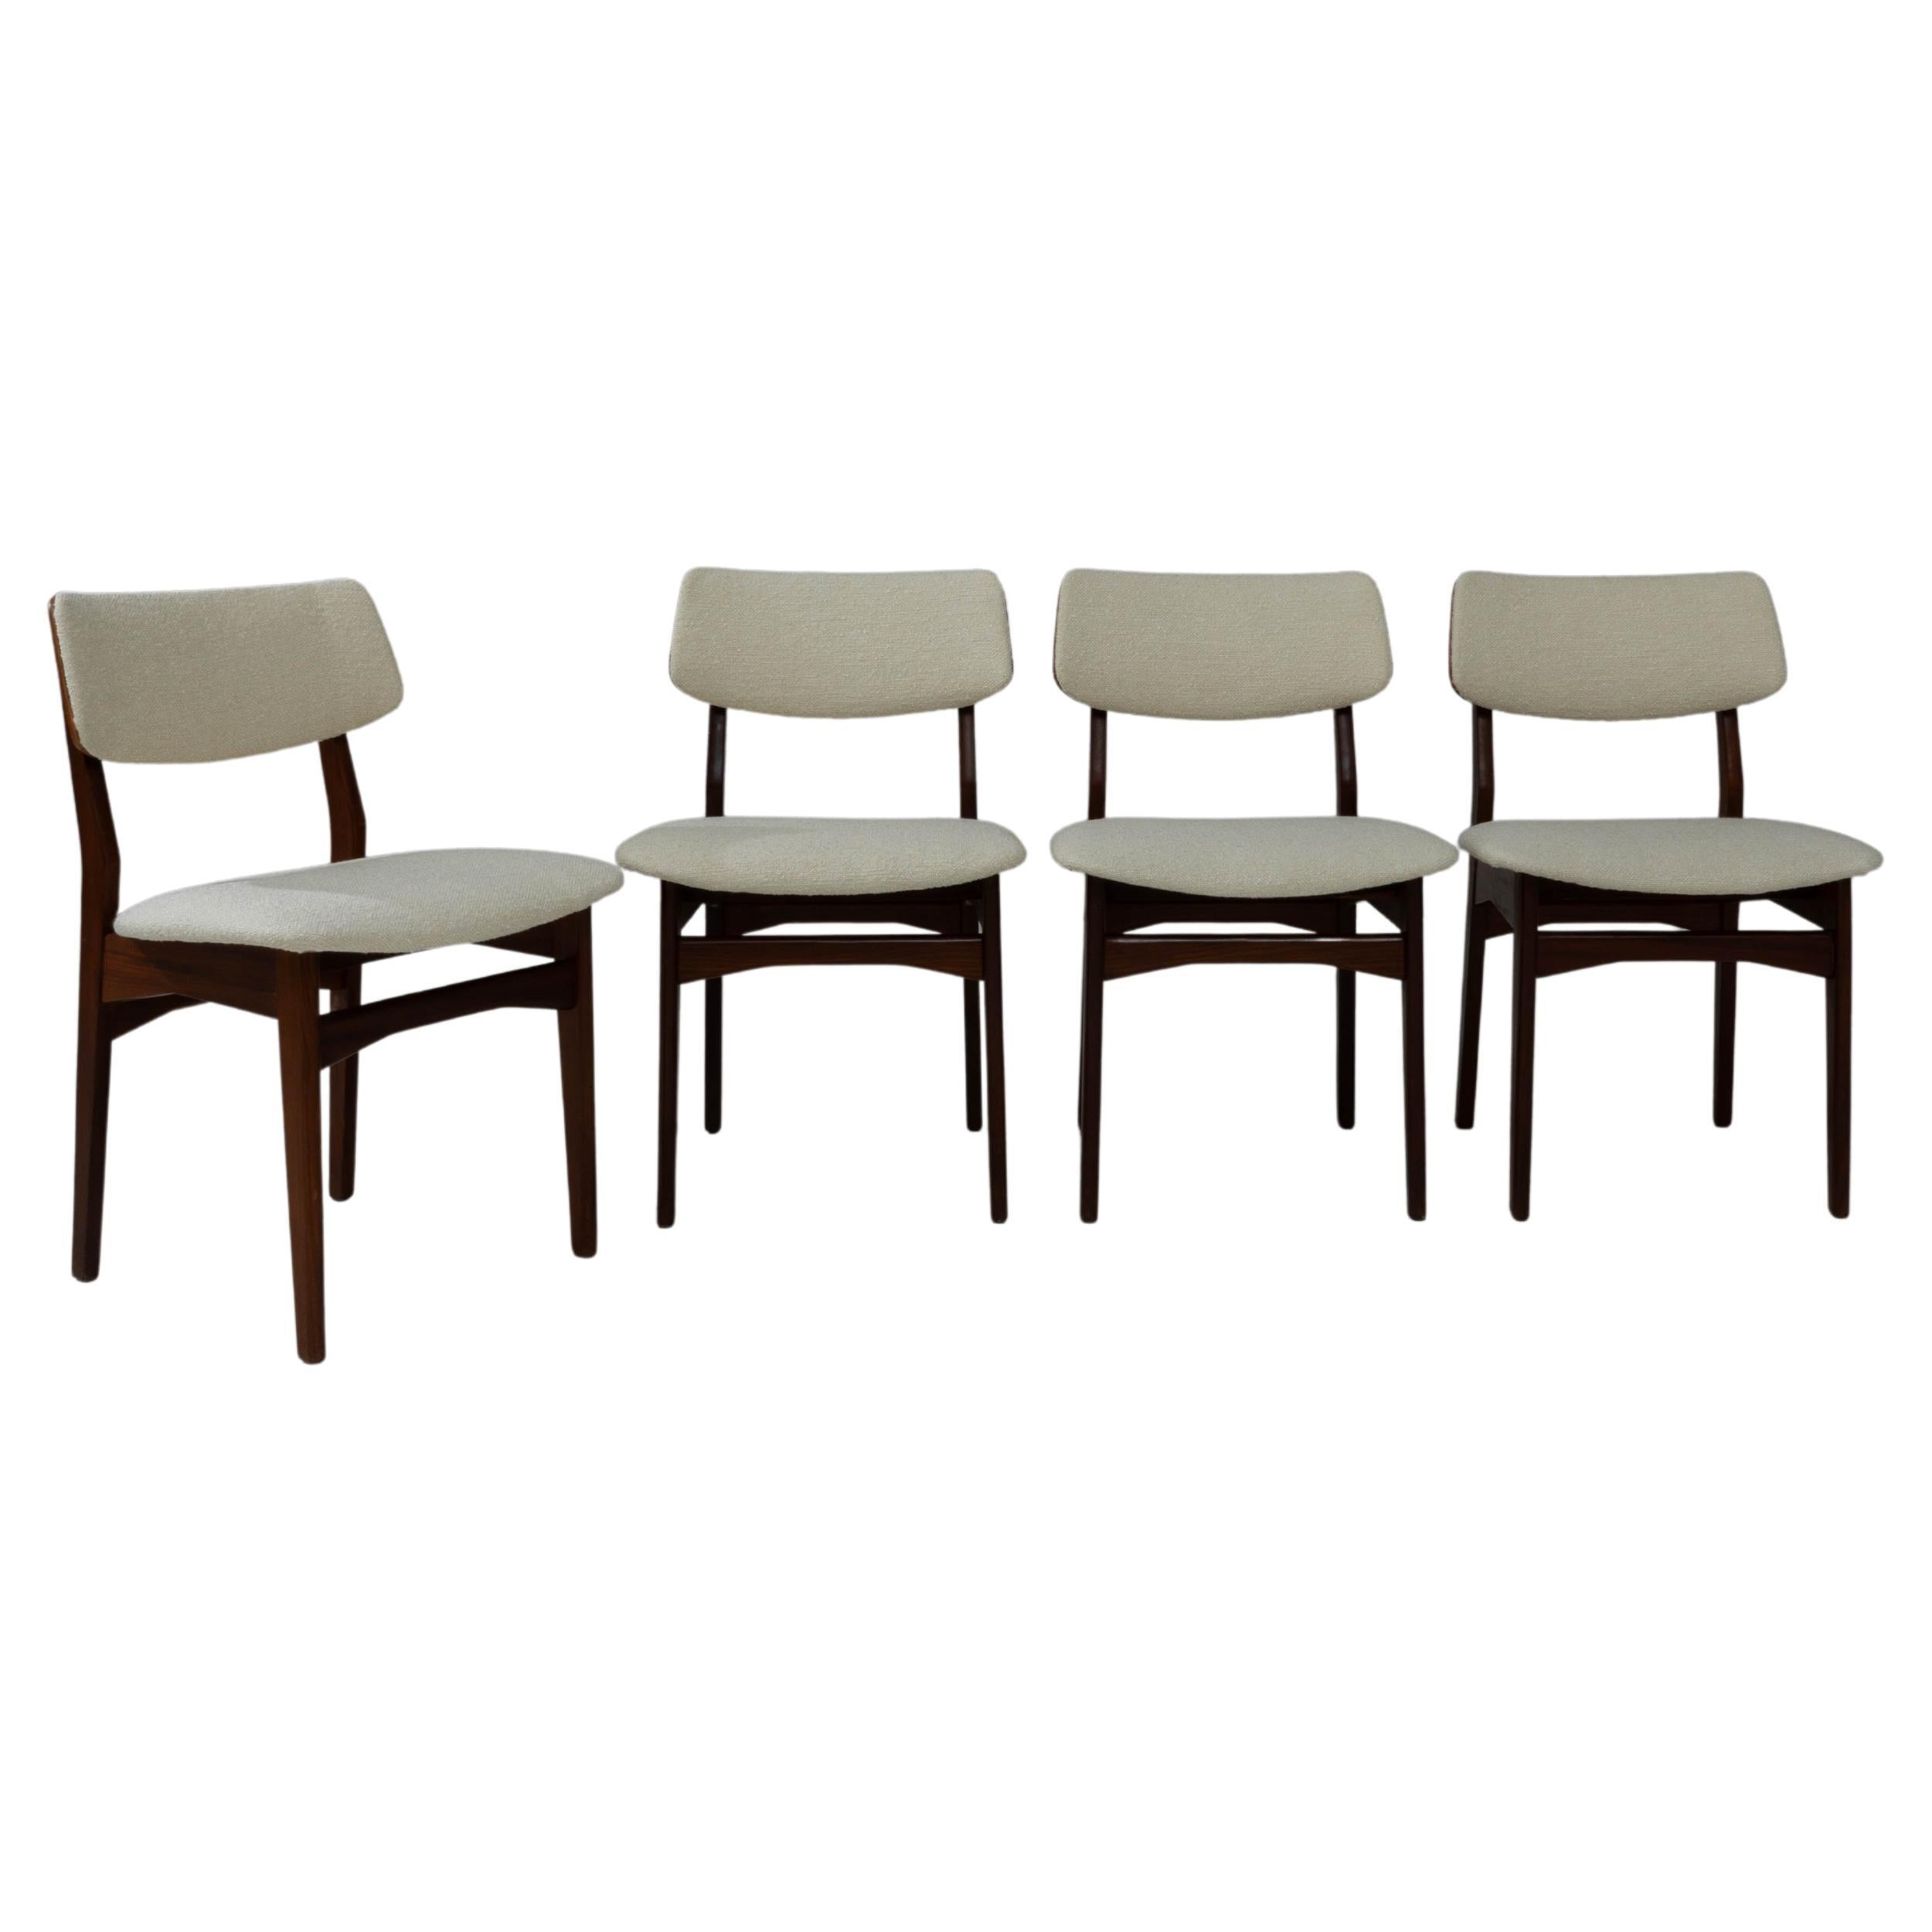 20th Century Scandinavian Upholstered Dining Chairs, Set of 4 For Sale